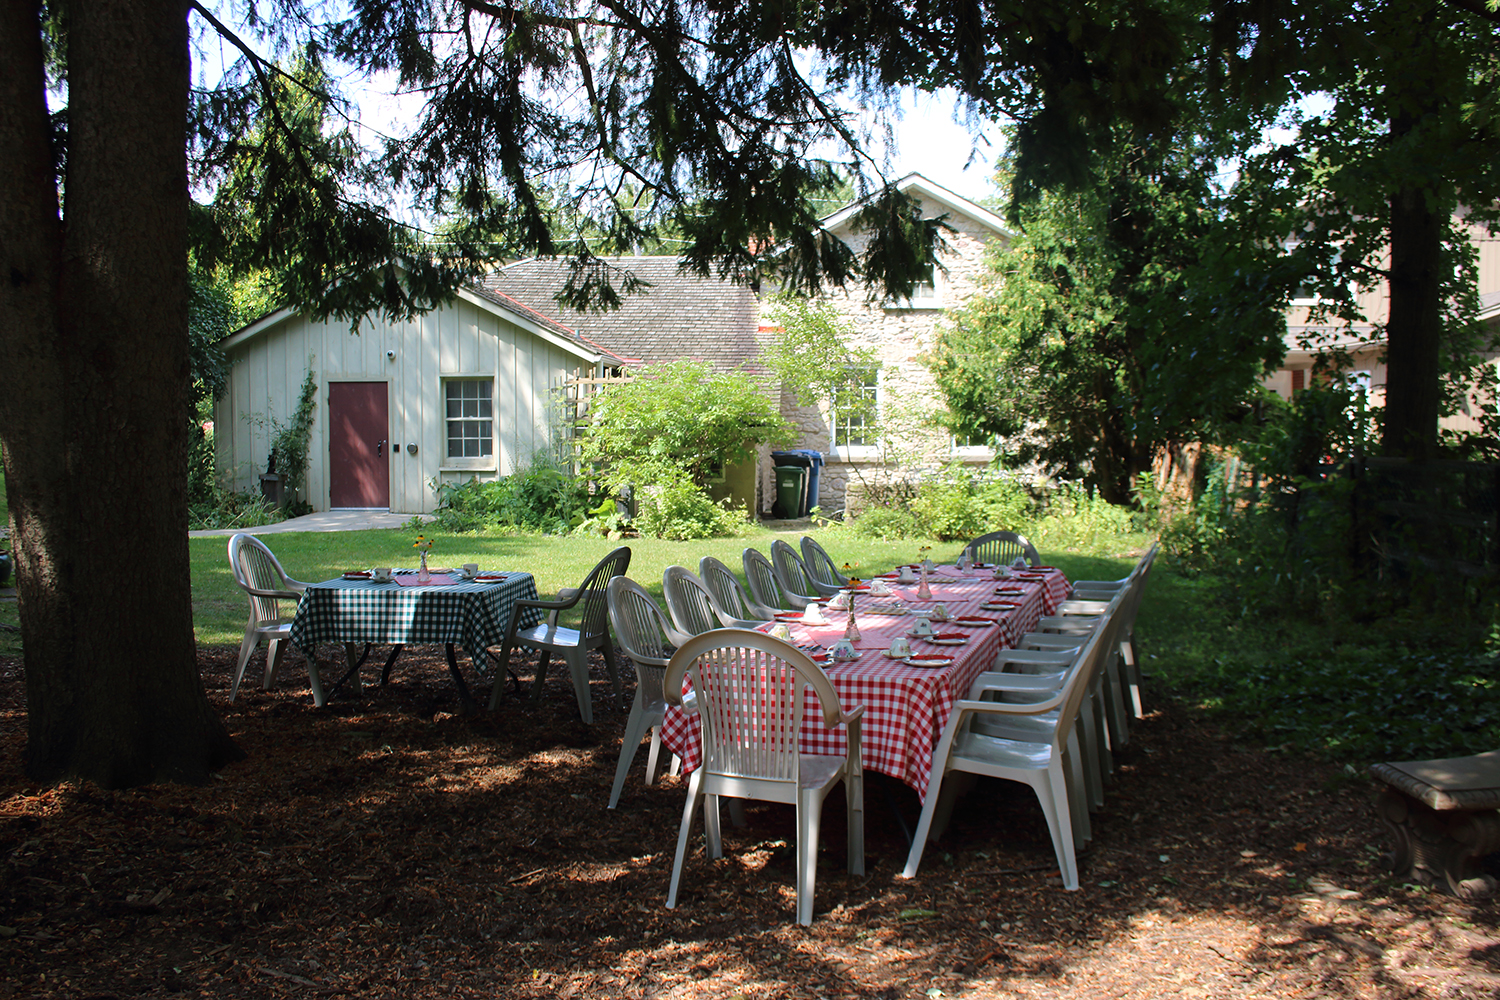 Two tables set up in the backyard gardens of McCrae House. Large pine trees frame the gardens.